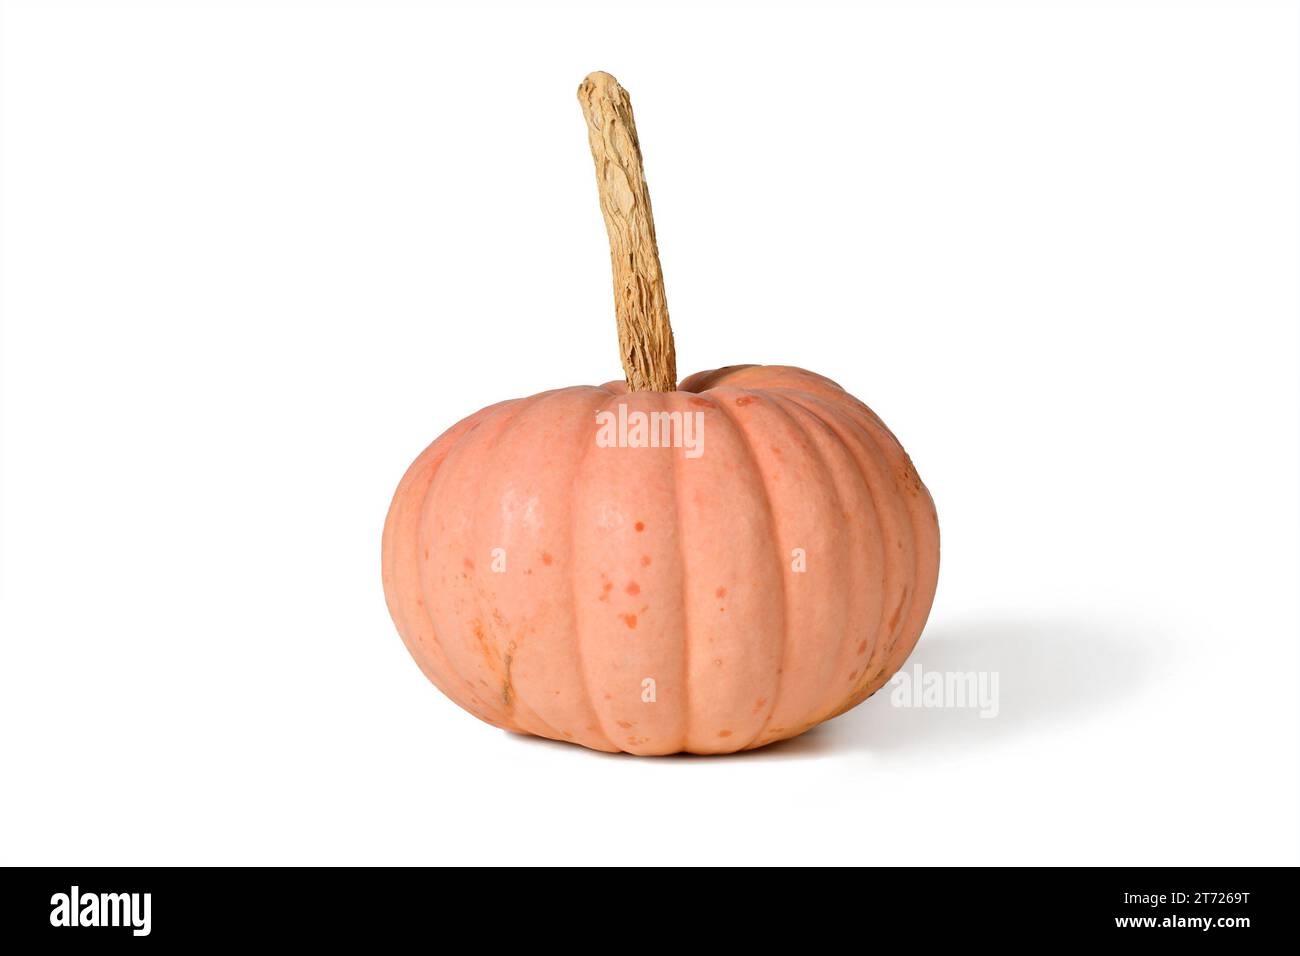 Pastel pink colored 'Miss Sophie Pink' Halloween pumpkin on white background Stock Photo